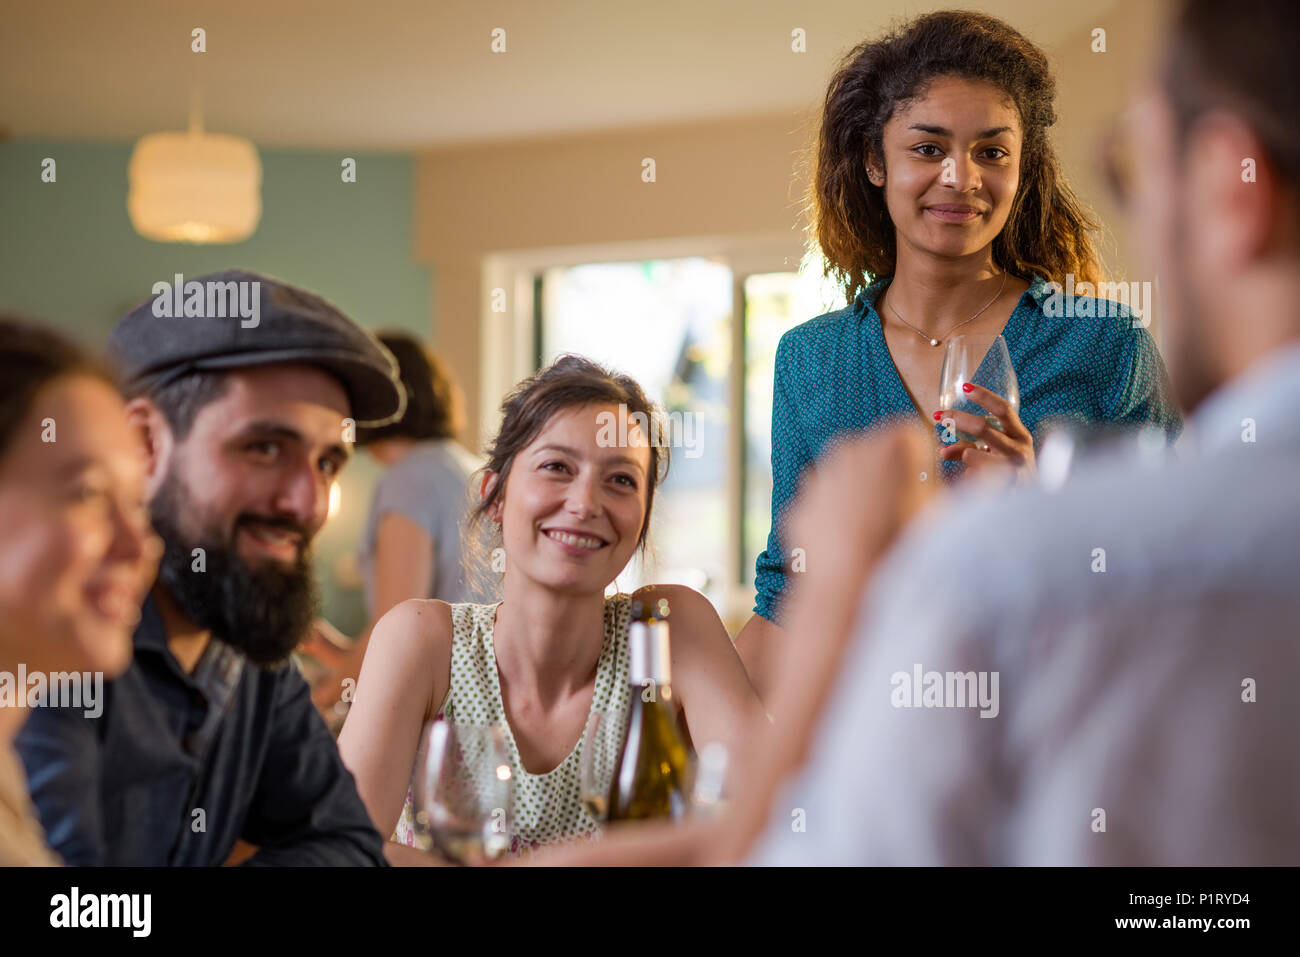 Mixed group of friends having fun while sharing a meal  Stock Photo